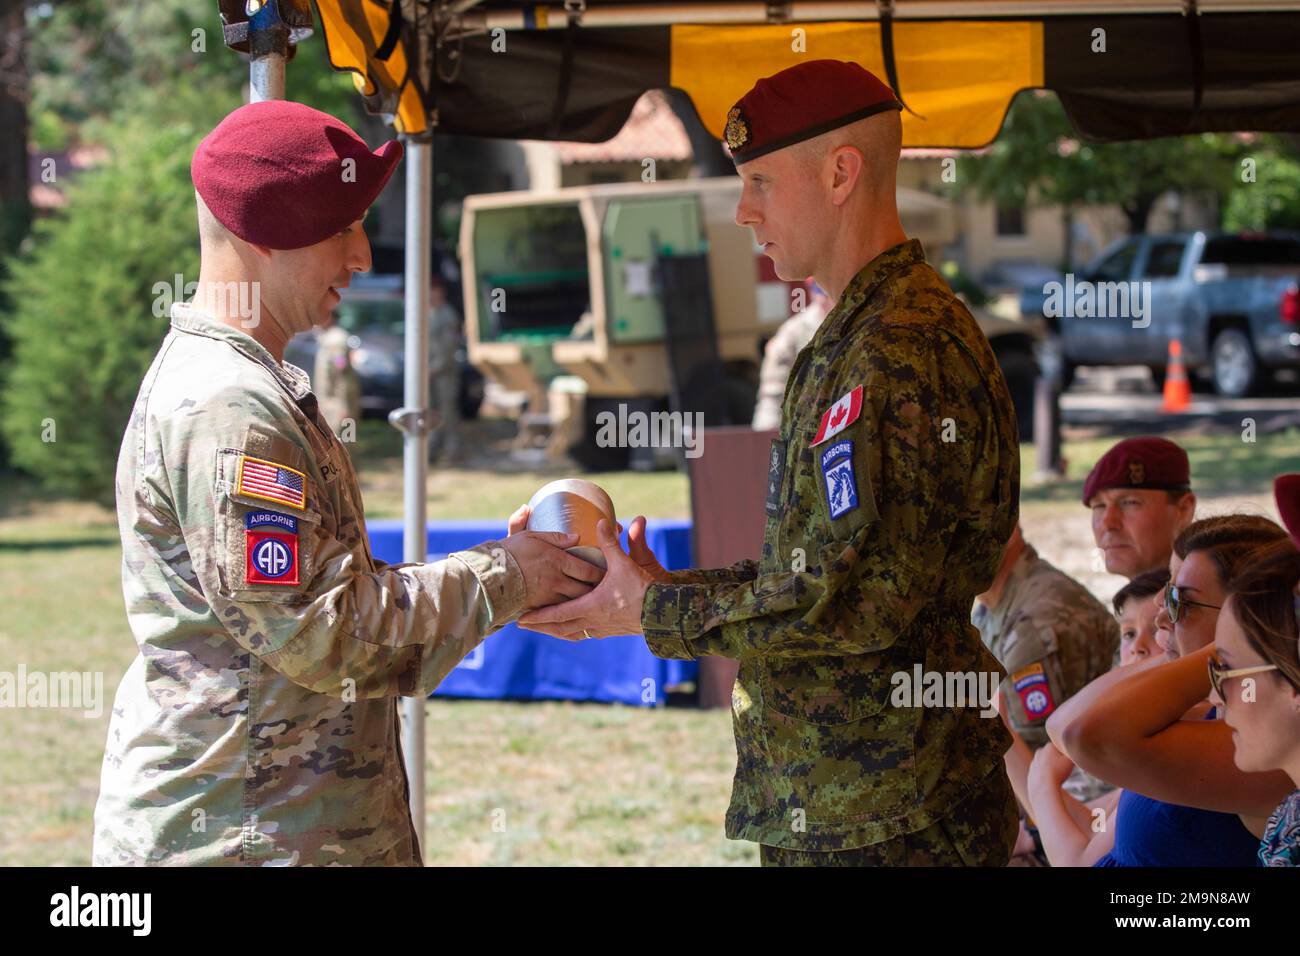 Brig. Gen. Robert T. Ritchie, assistant commanding general - operations, XVIII Airborne Corps, receives a shell casing on Ft. Bragg, N.C. May 20, 2022. The shell casing comes from a 15- round salute by Paratroopers assigned to B-Co, 3rd Battalion, 319th Field Artillery Regiment, commanded by Capt. Michael Polland and 1st. Sgt. Jose Lopez. Stock Photo